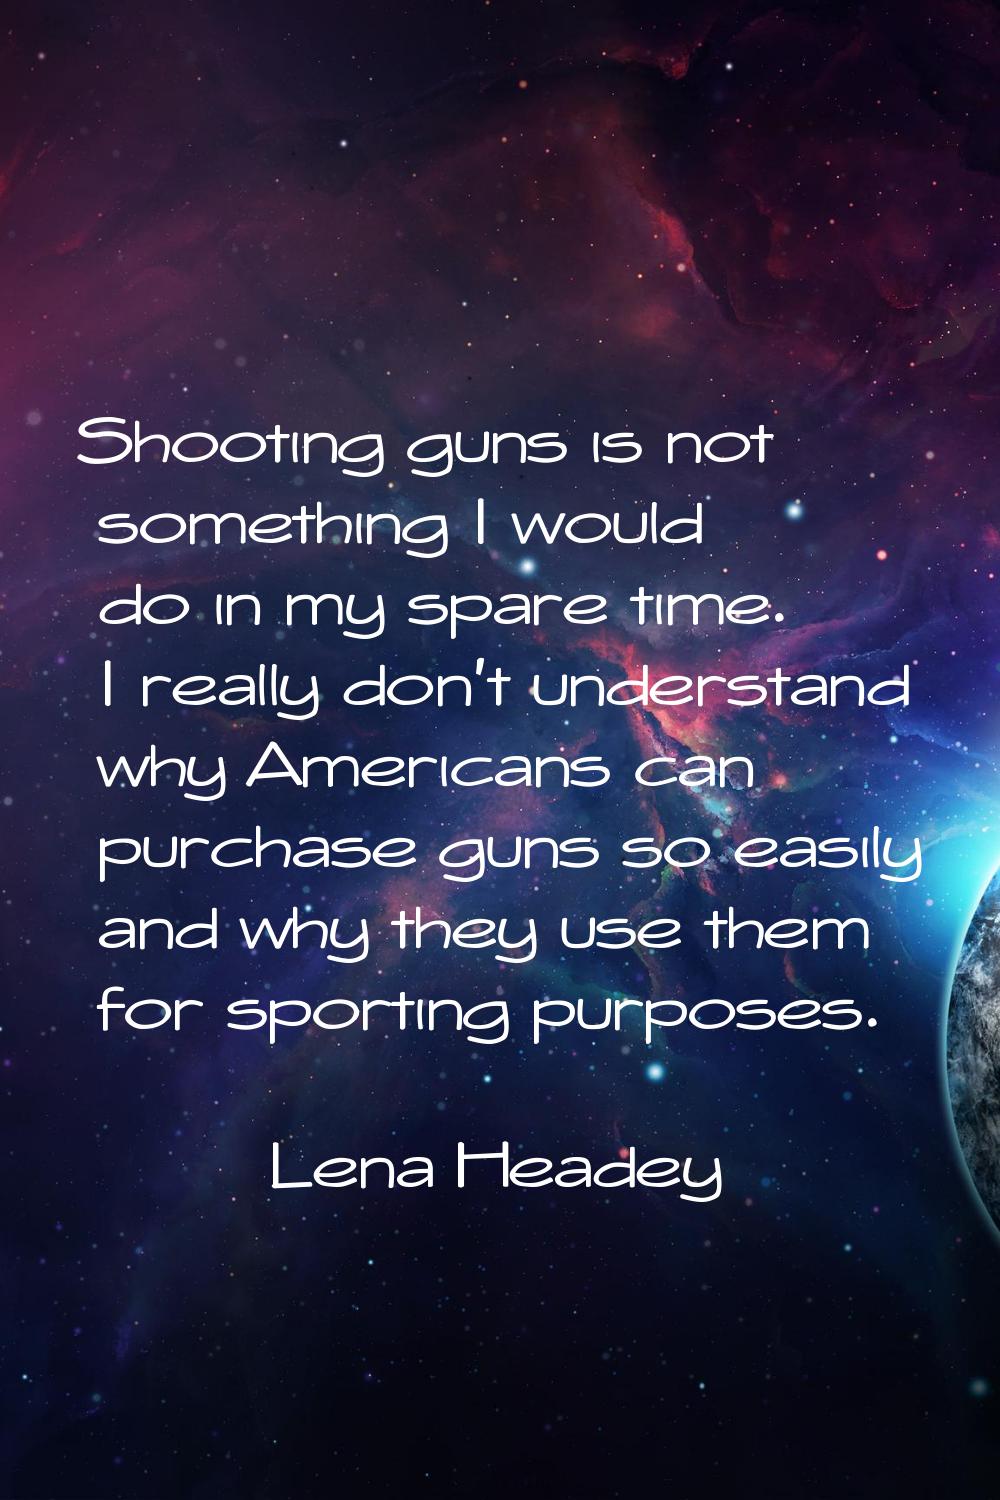 Shooting guns is not something I would do in my spare time. I really don't understand why Americans